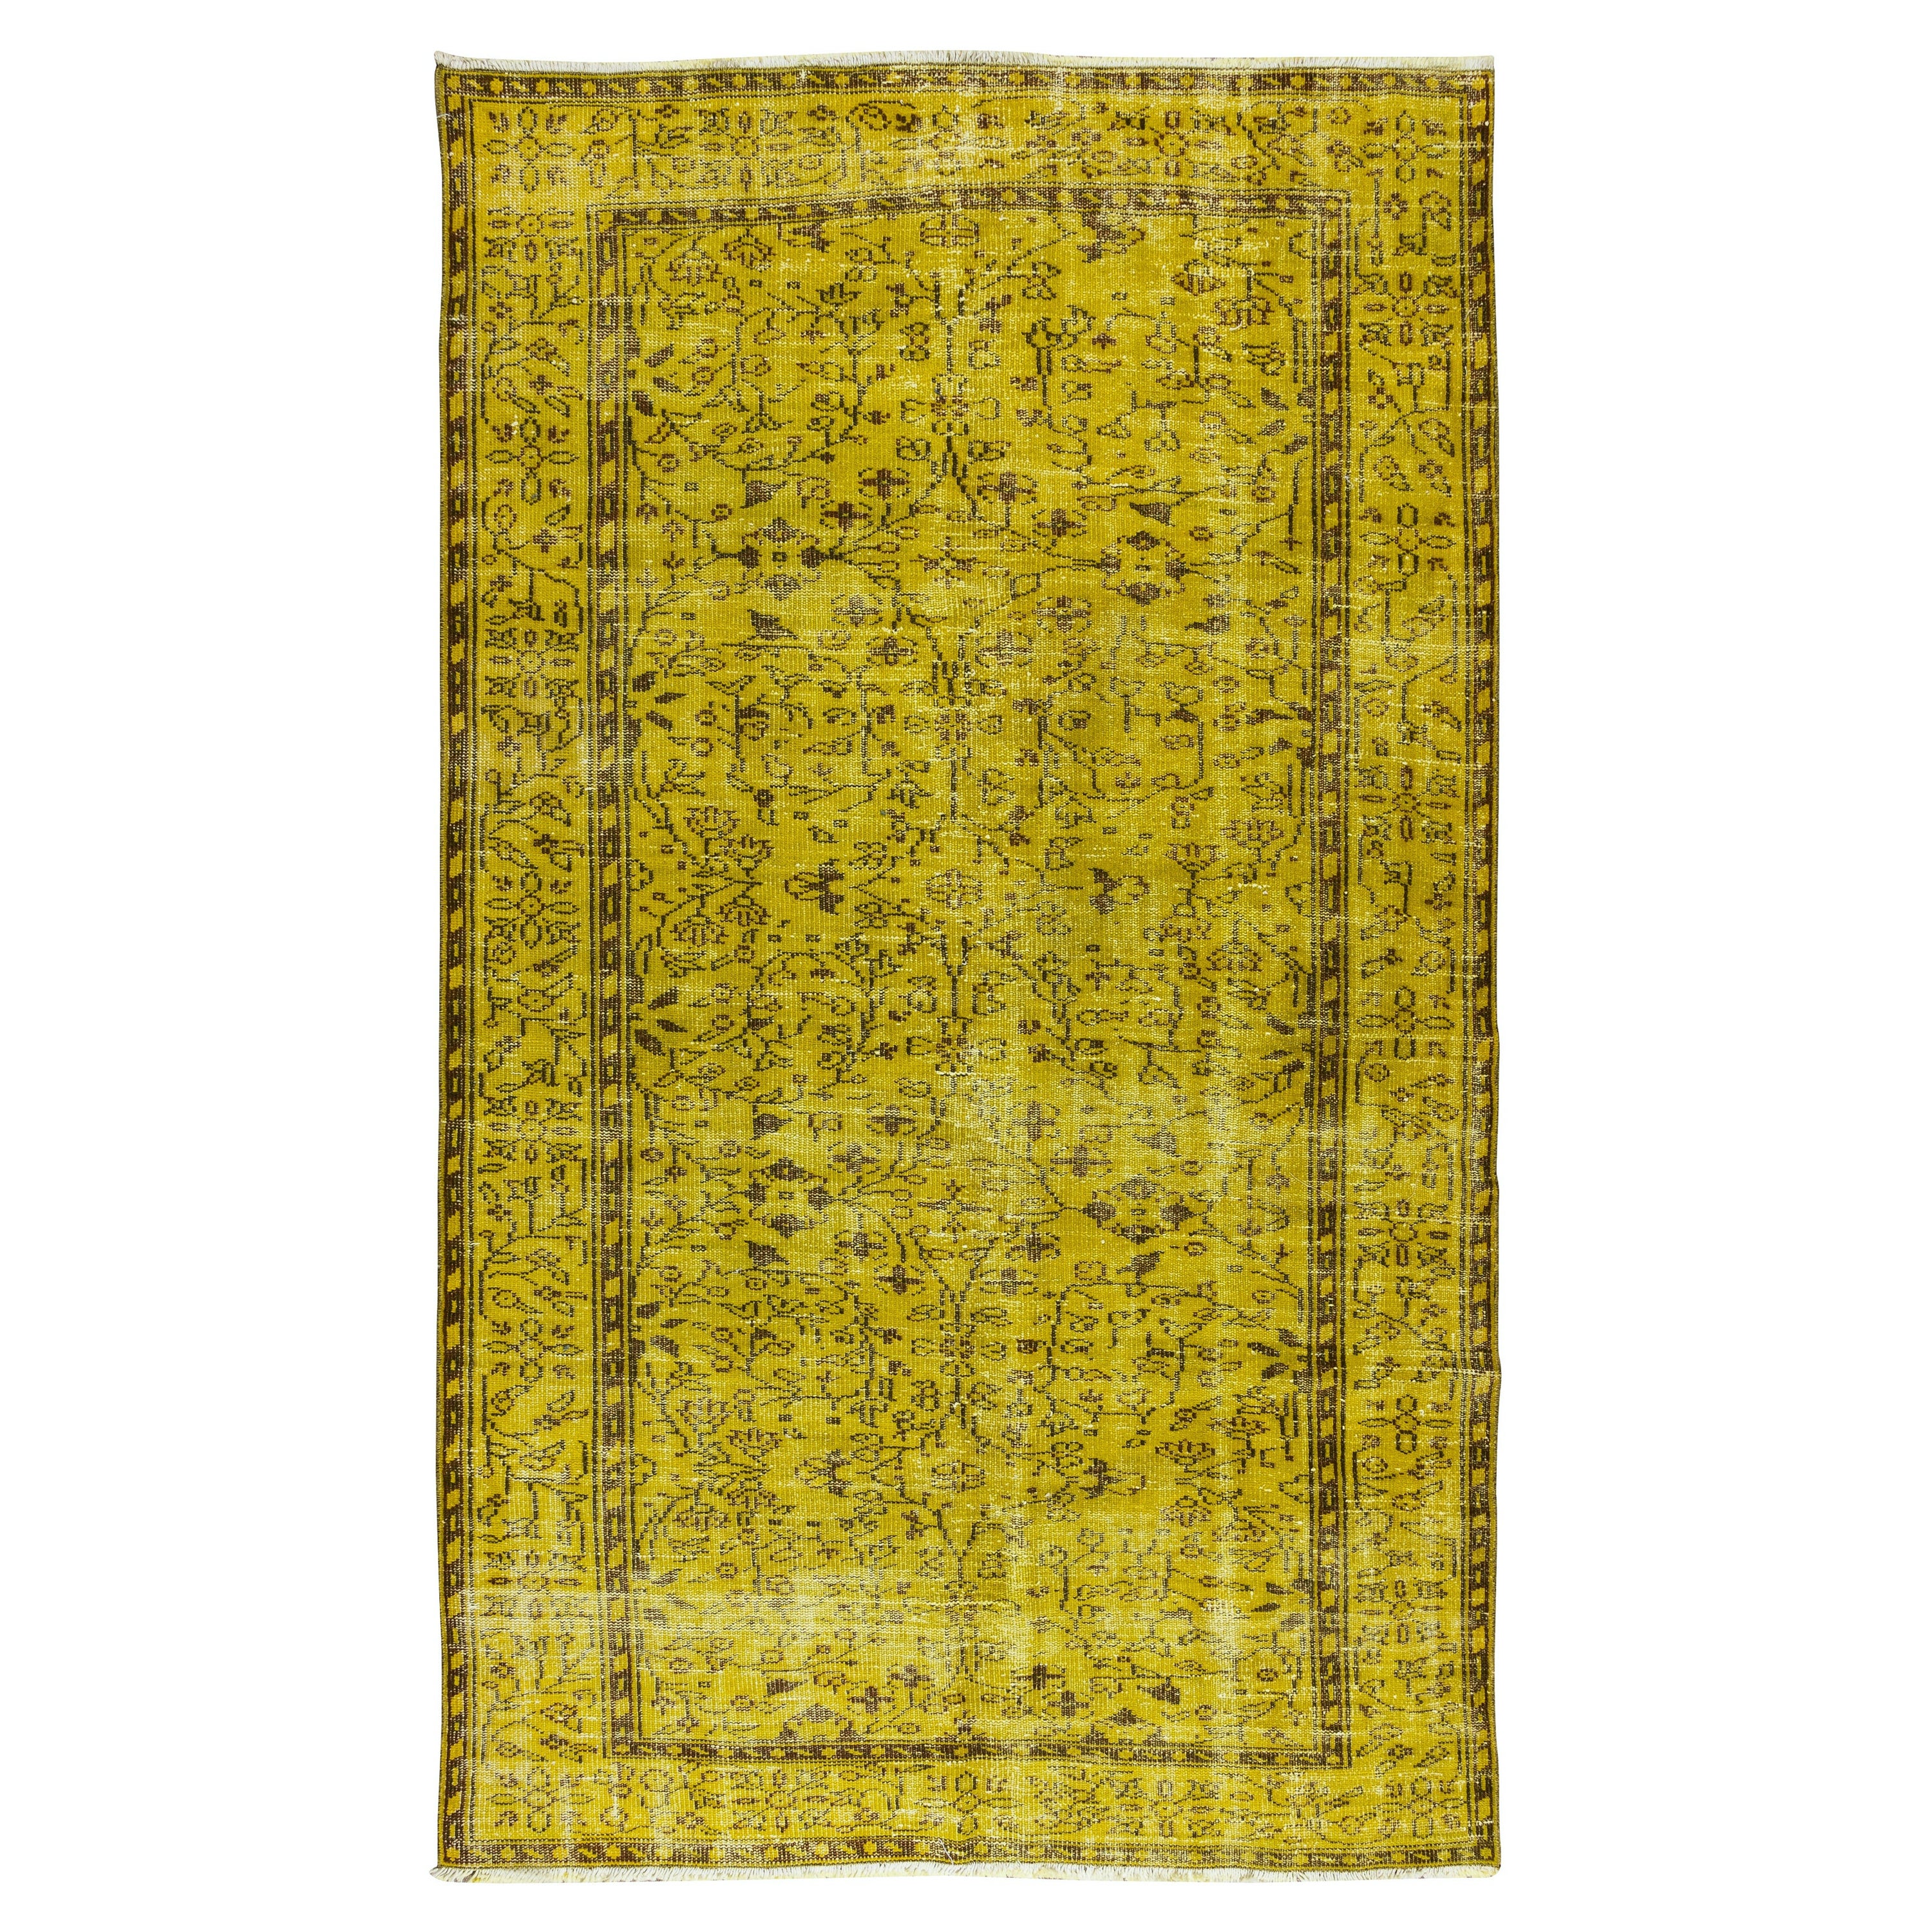 5.3x8.6 Ft Handmade Turkish Yellow Area Rug with Floral Design